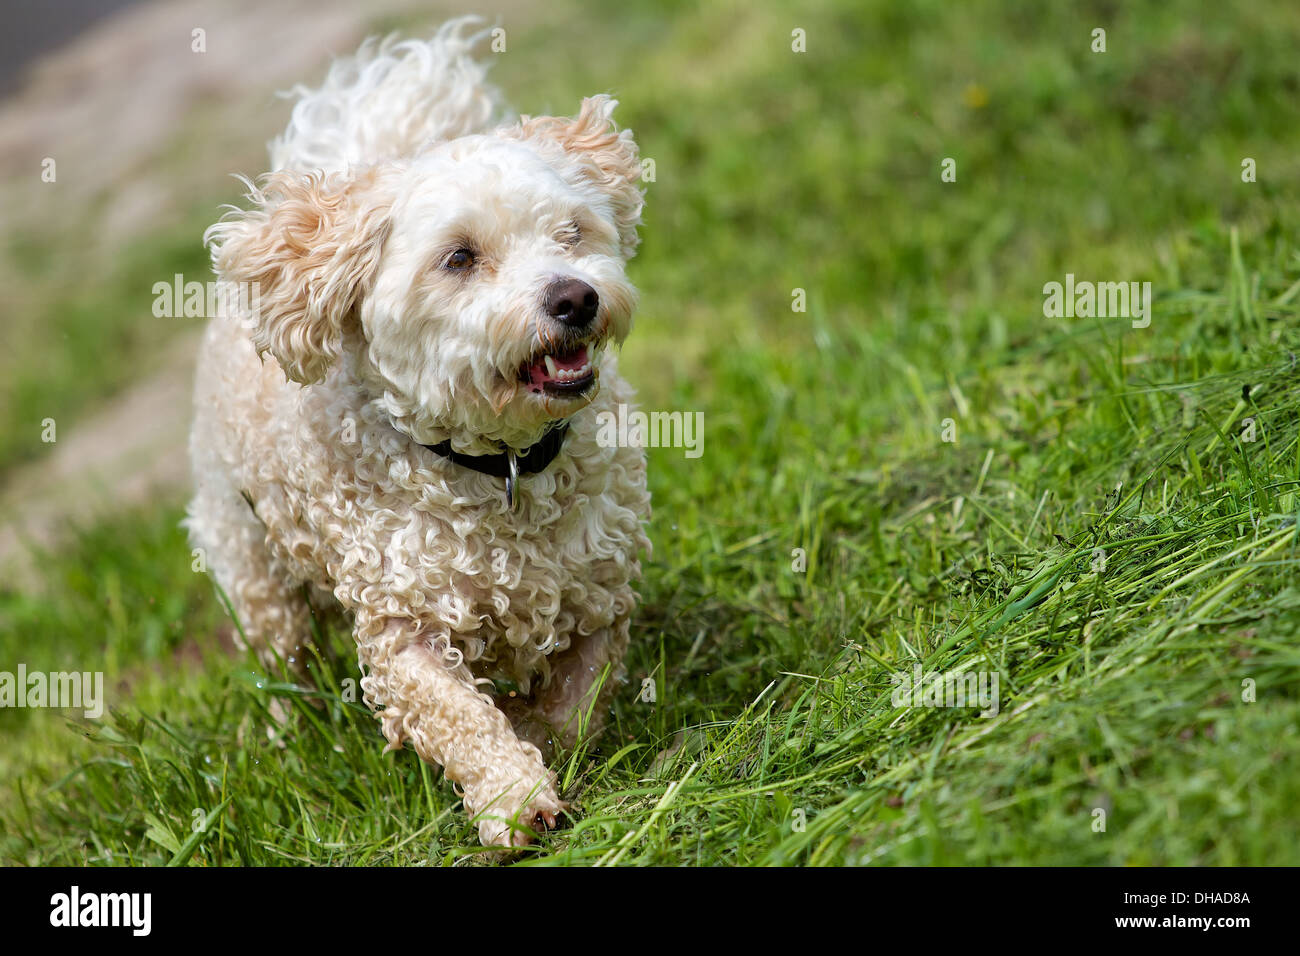 A wet Breed Dog Havanese - Poodle mix, running in a green field a high slope. Stock Photo